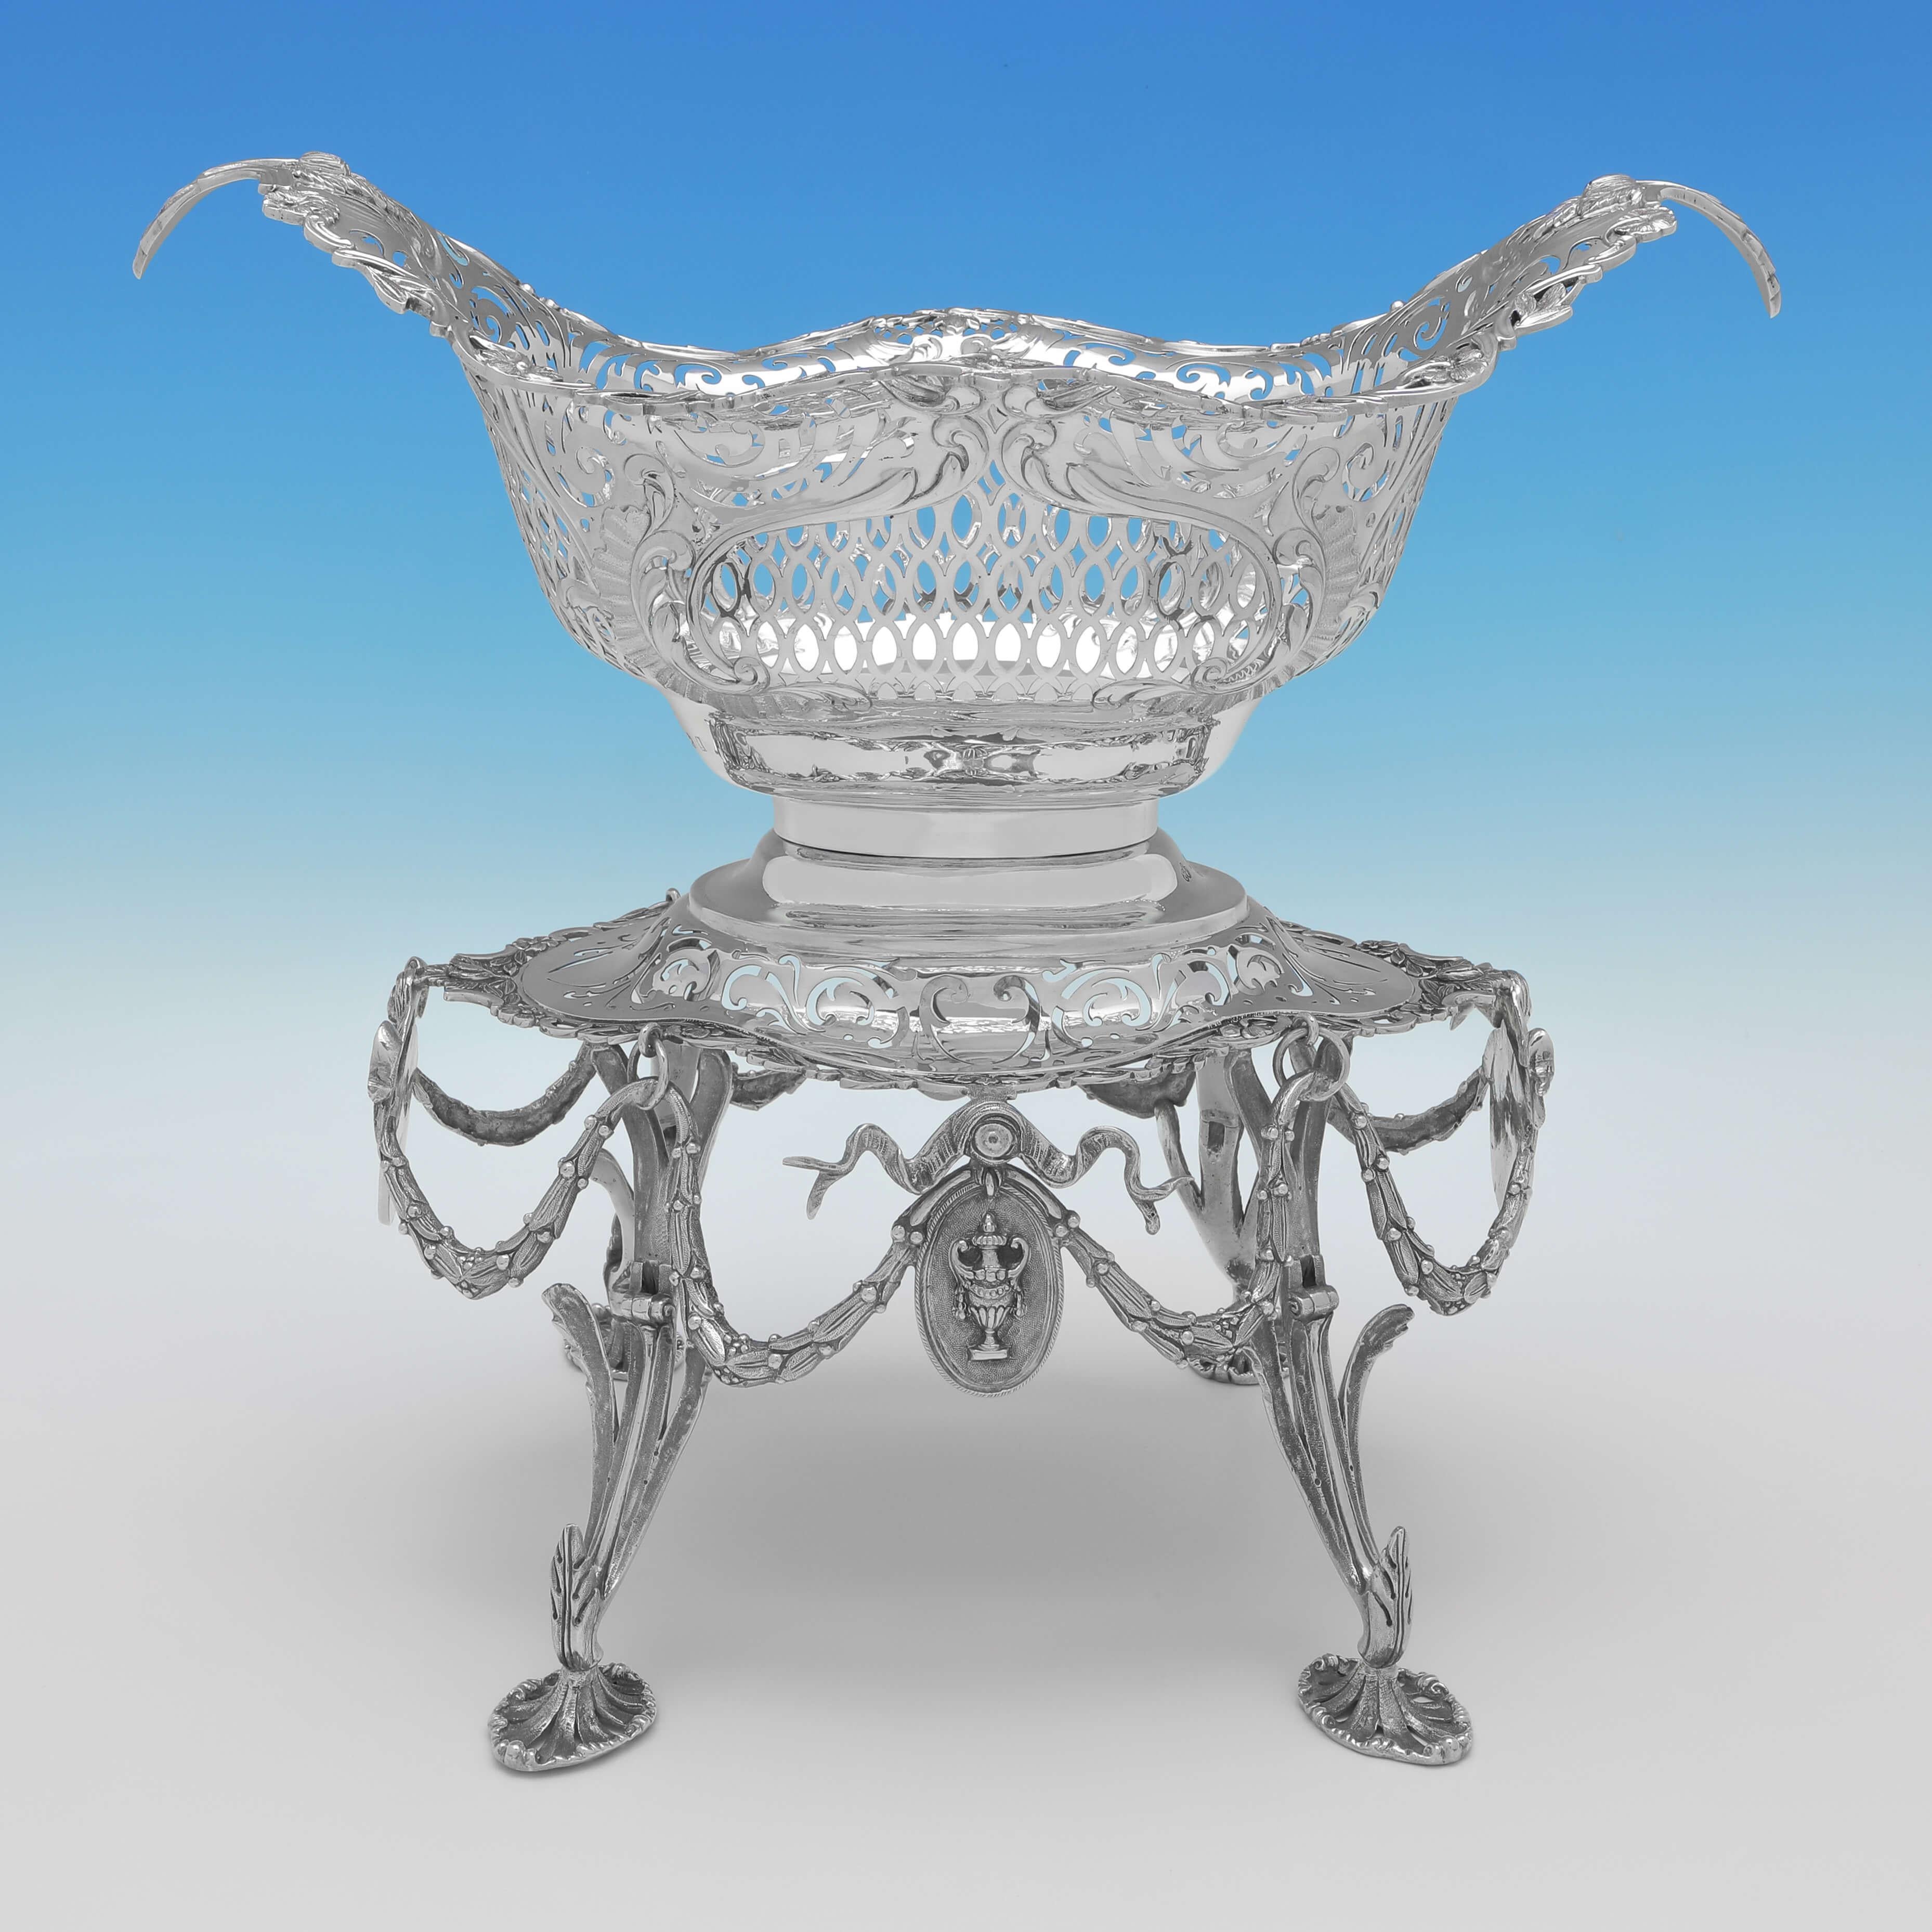 Neoclassical Revival Antique Edwardian Sterling Silver Centrepiece Epergne, 1910 For Sale 2